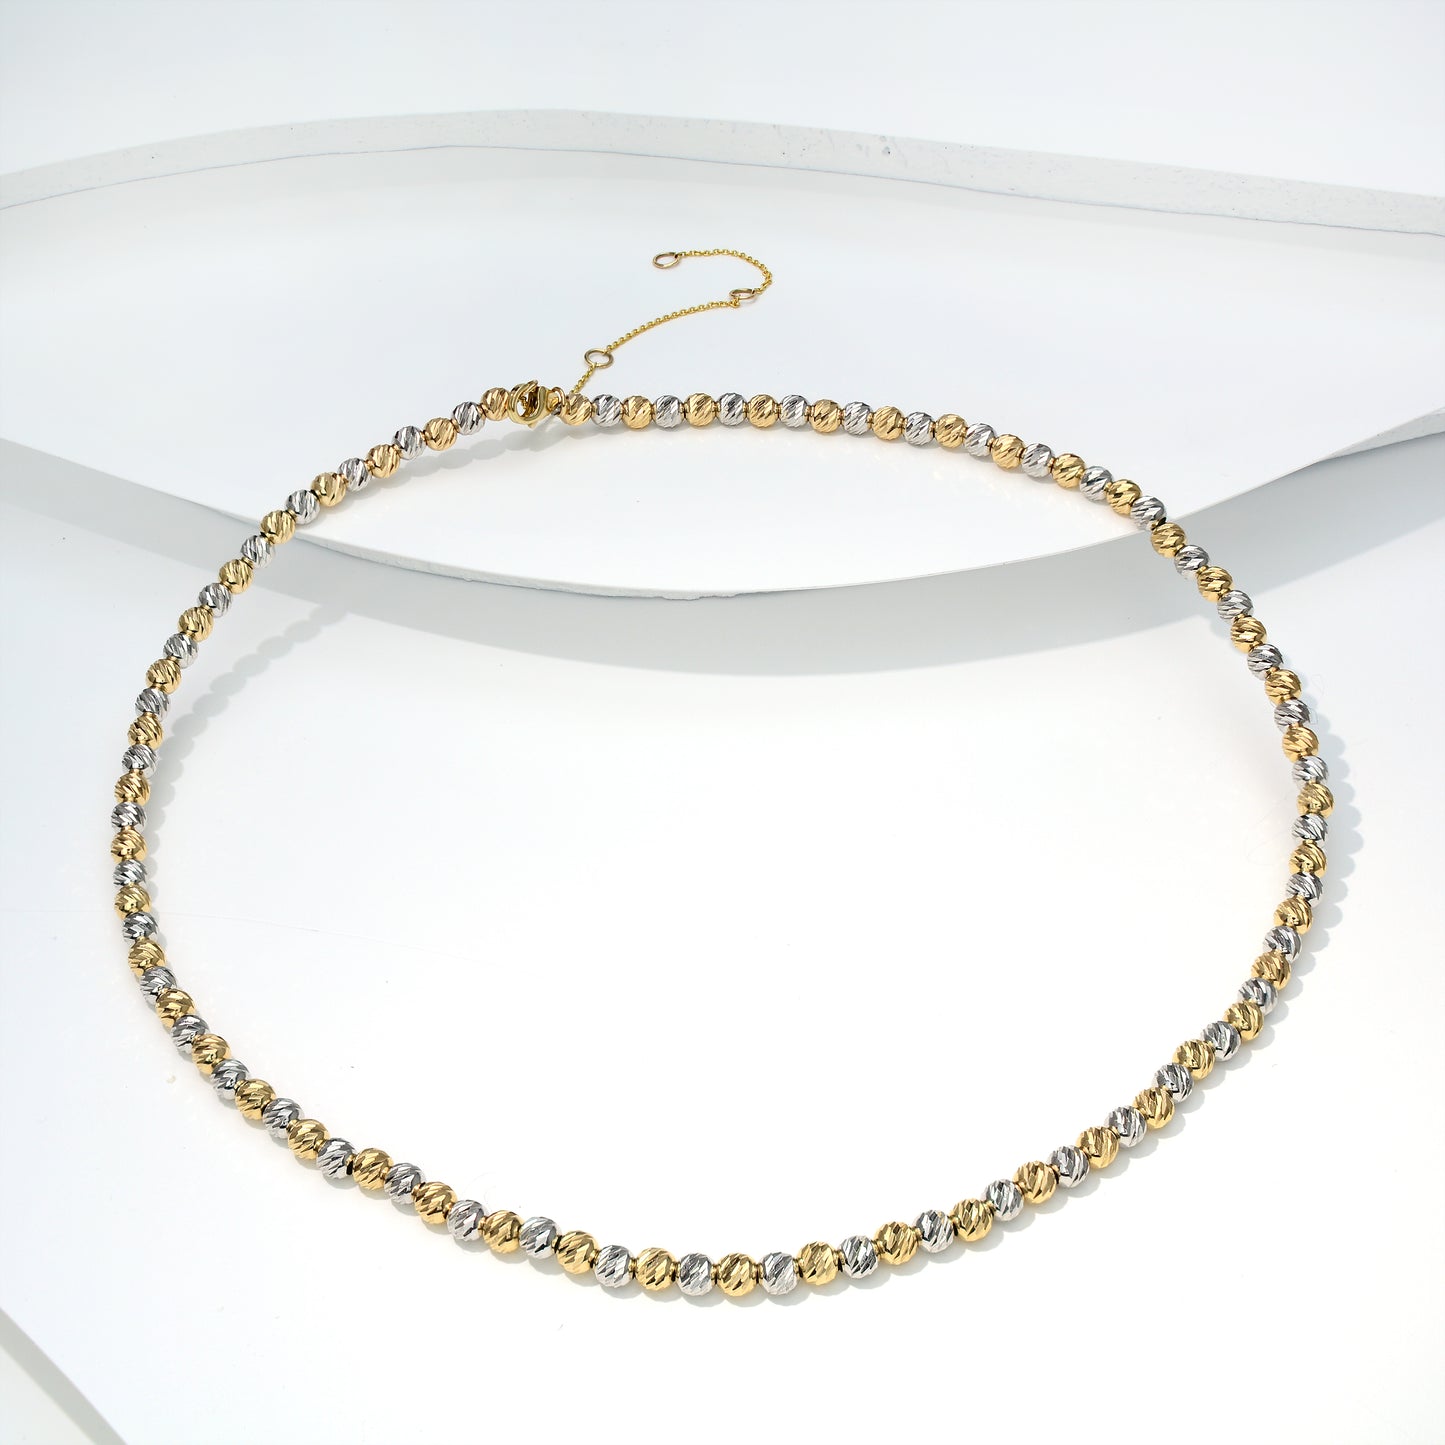 The Great Jones Necklace with 14K Yellow and White Gold Beads